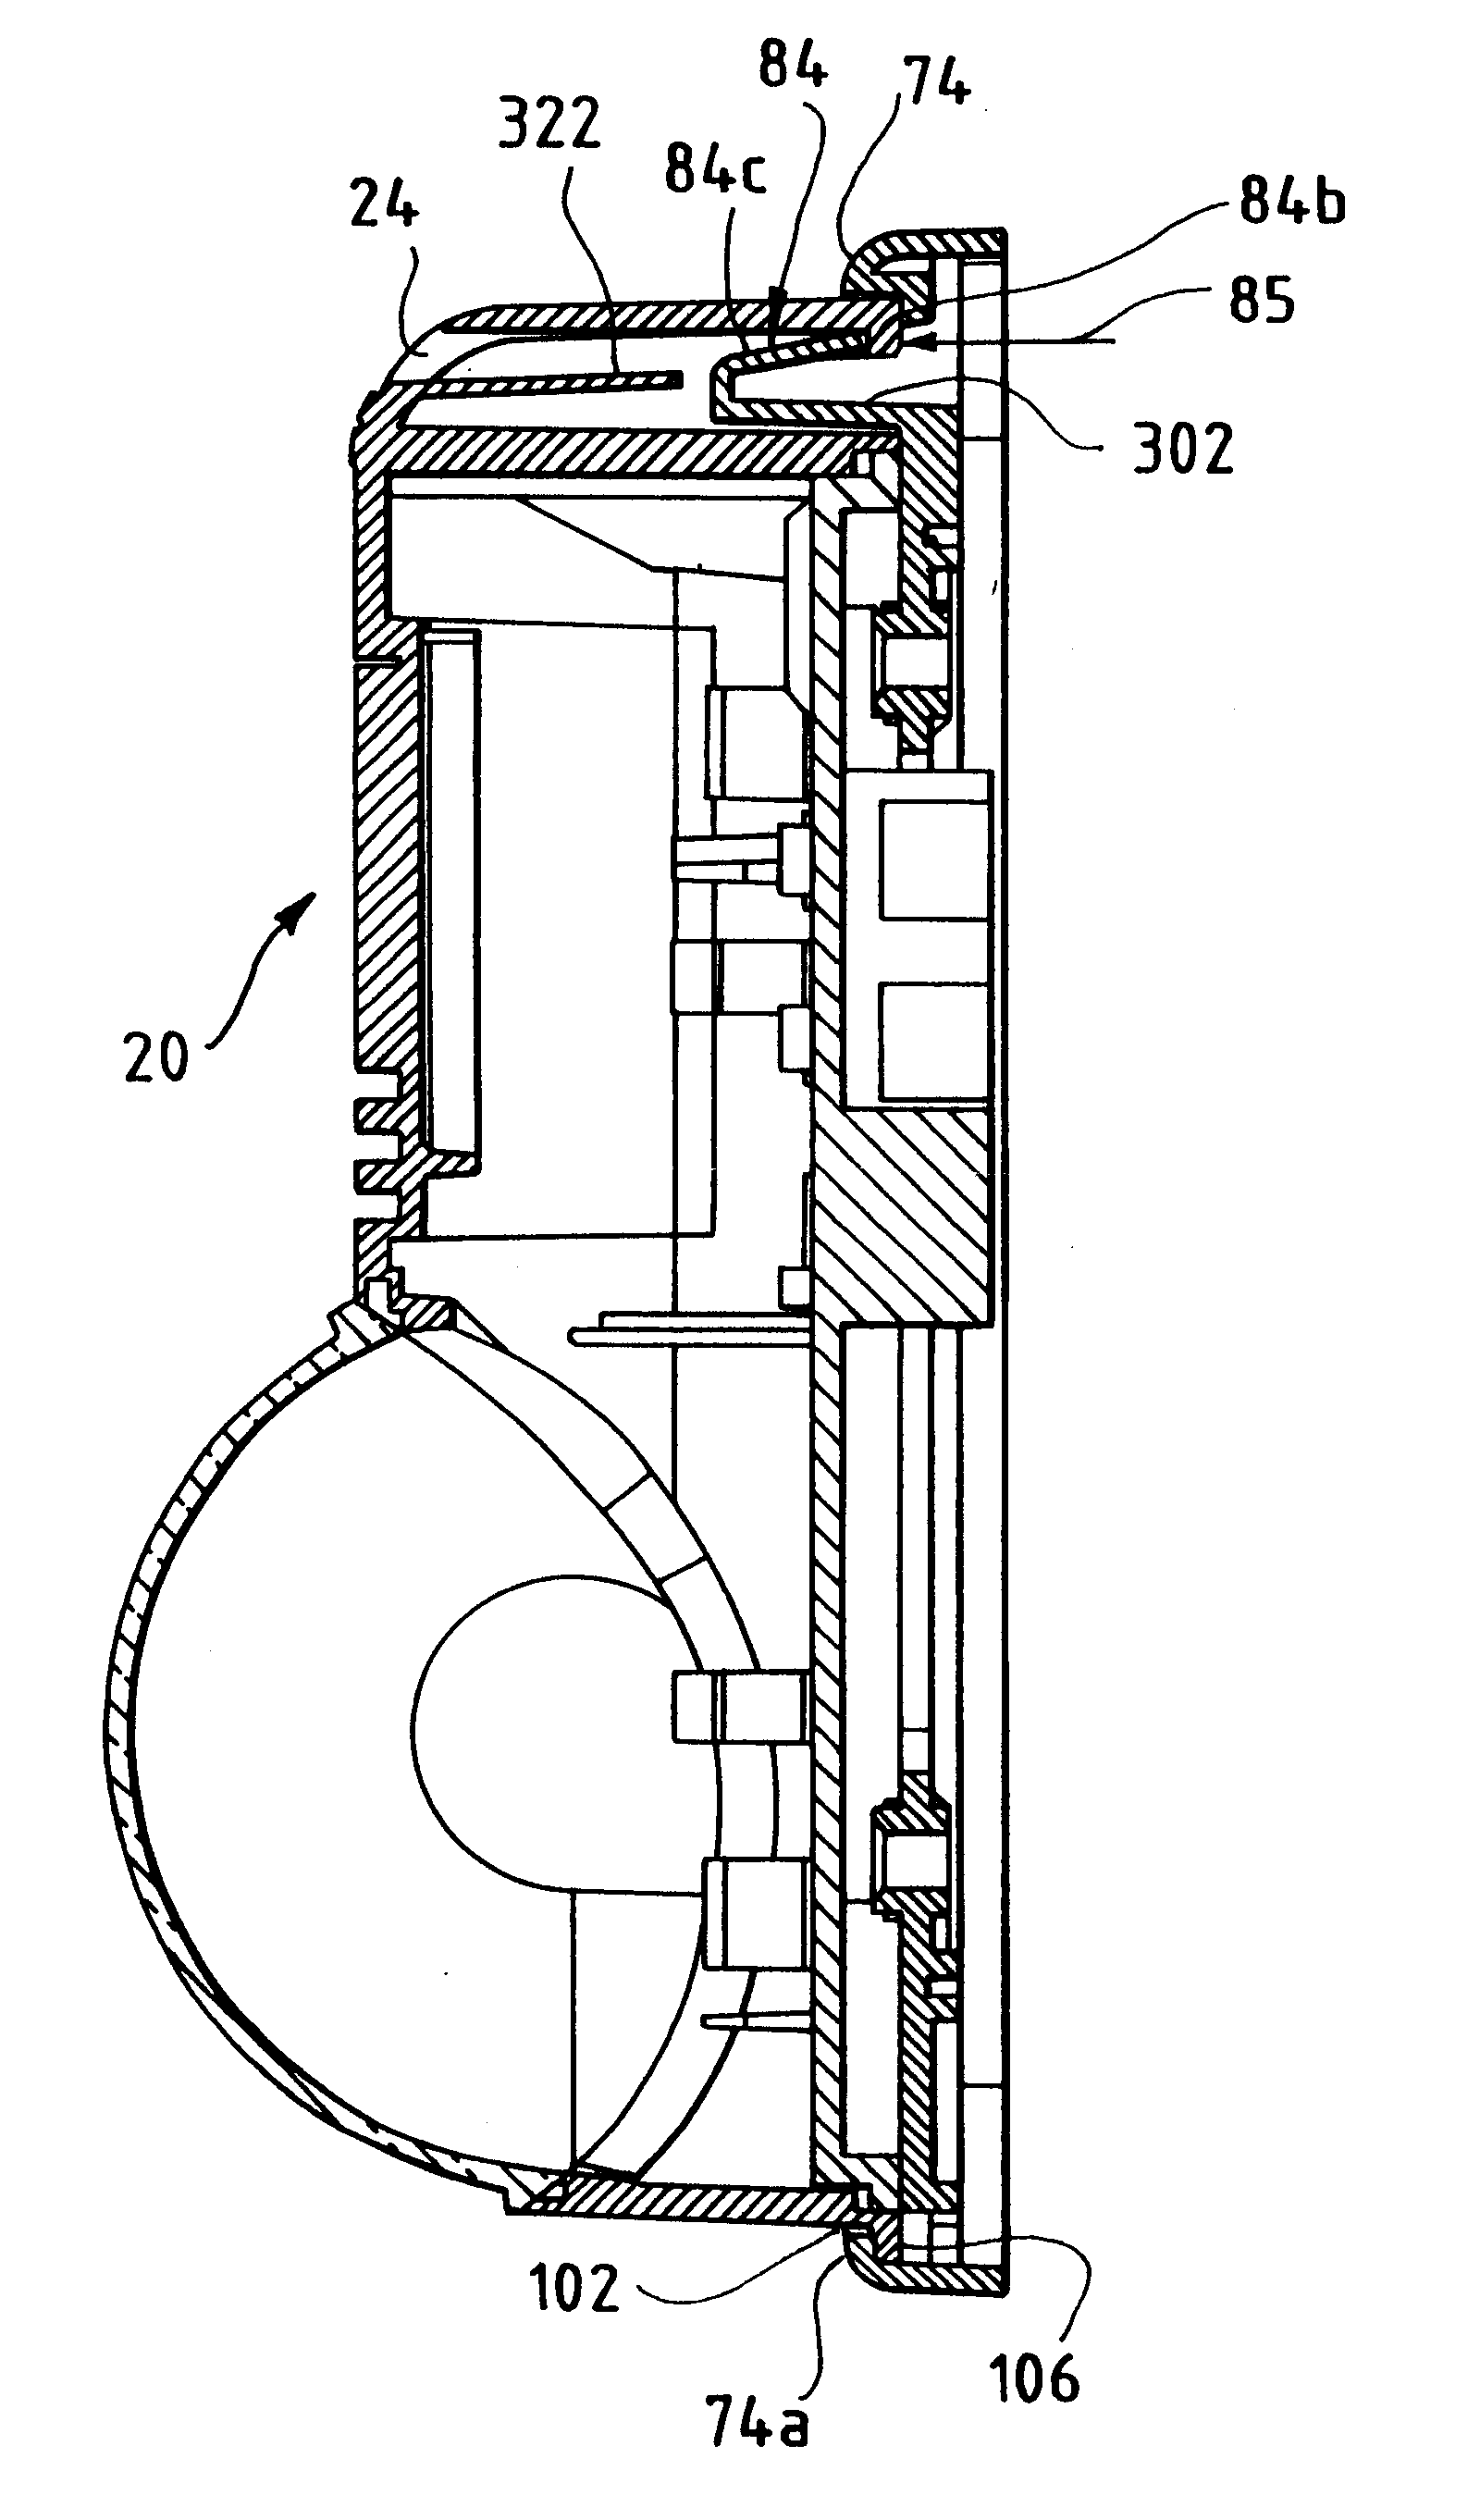 Fastenerless connection for output device